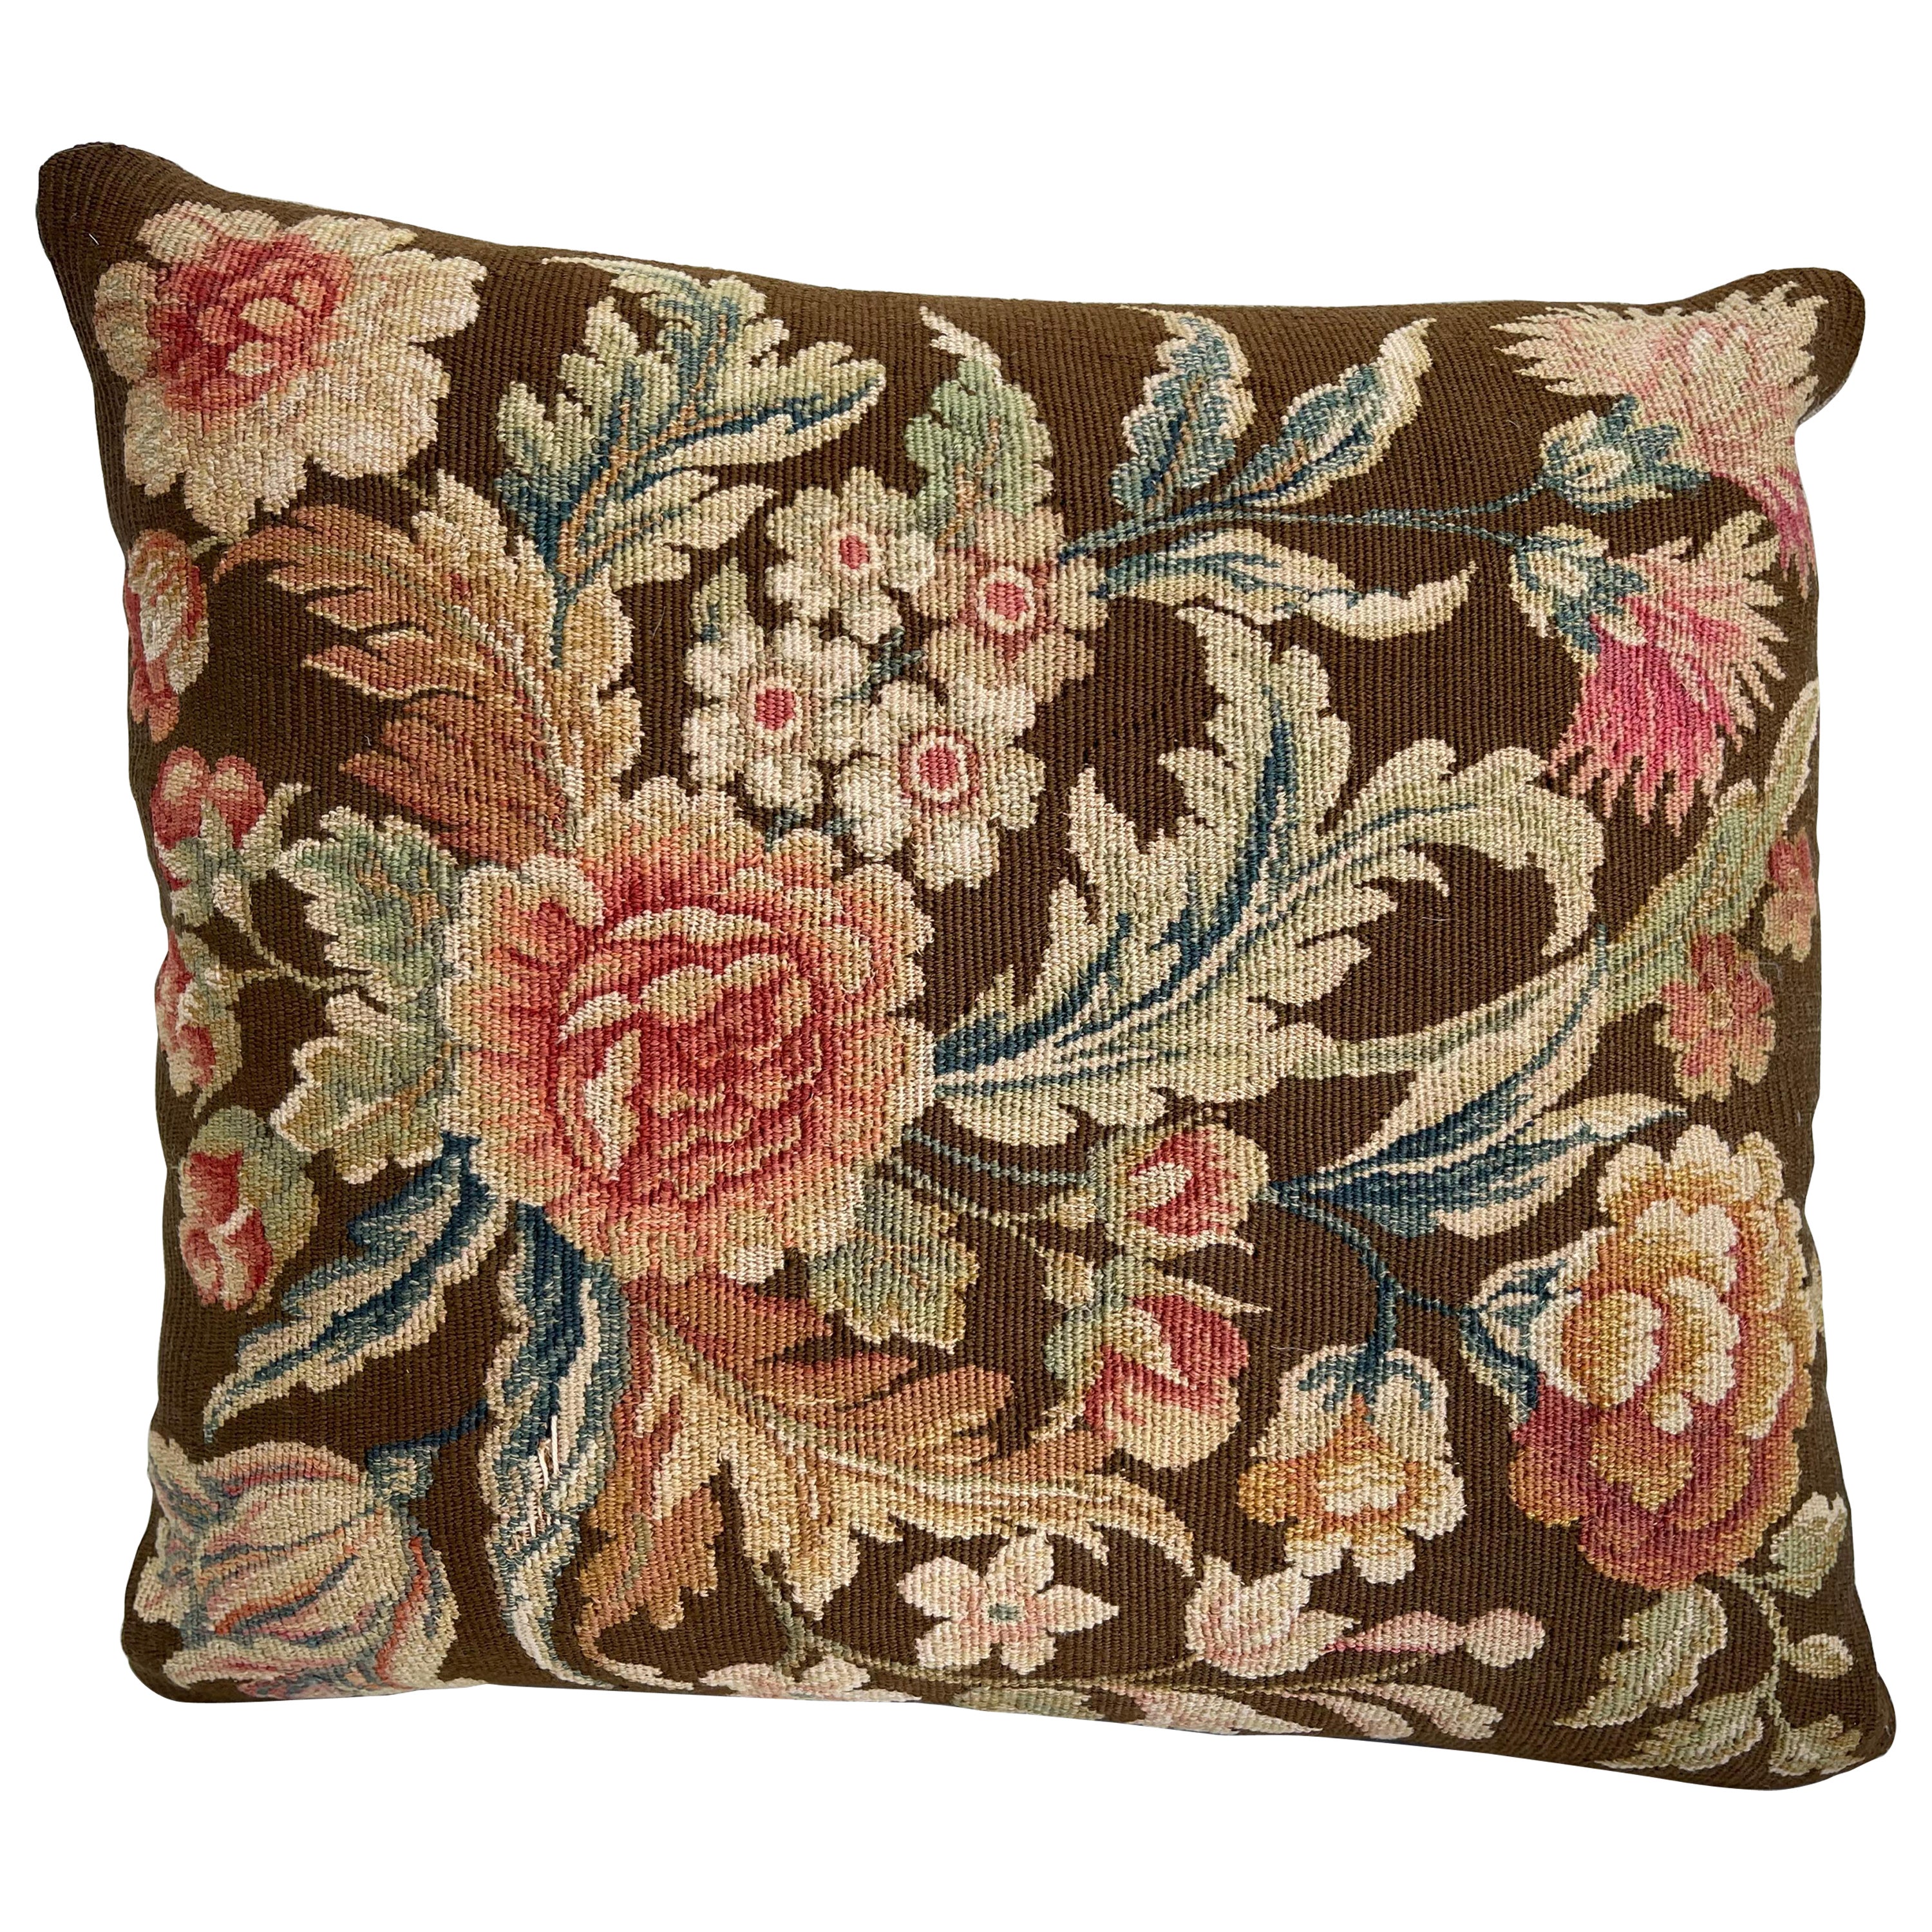 19th Century French Tapestry Pillow - 13" X 11"